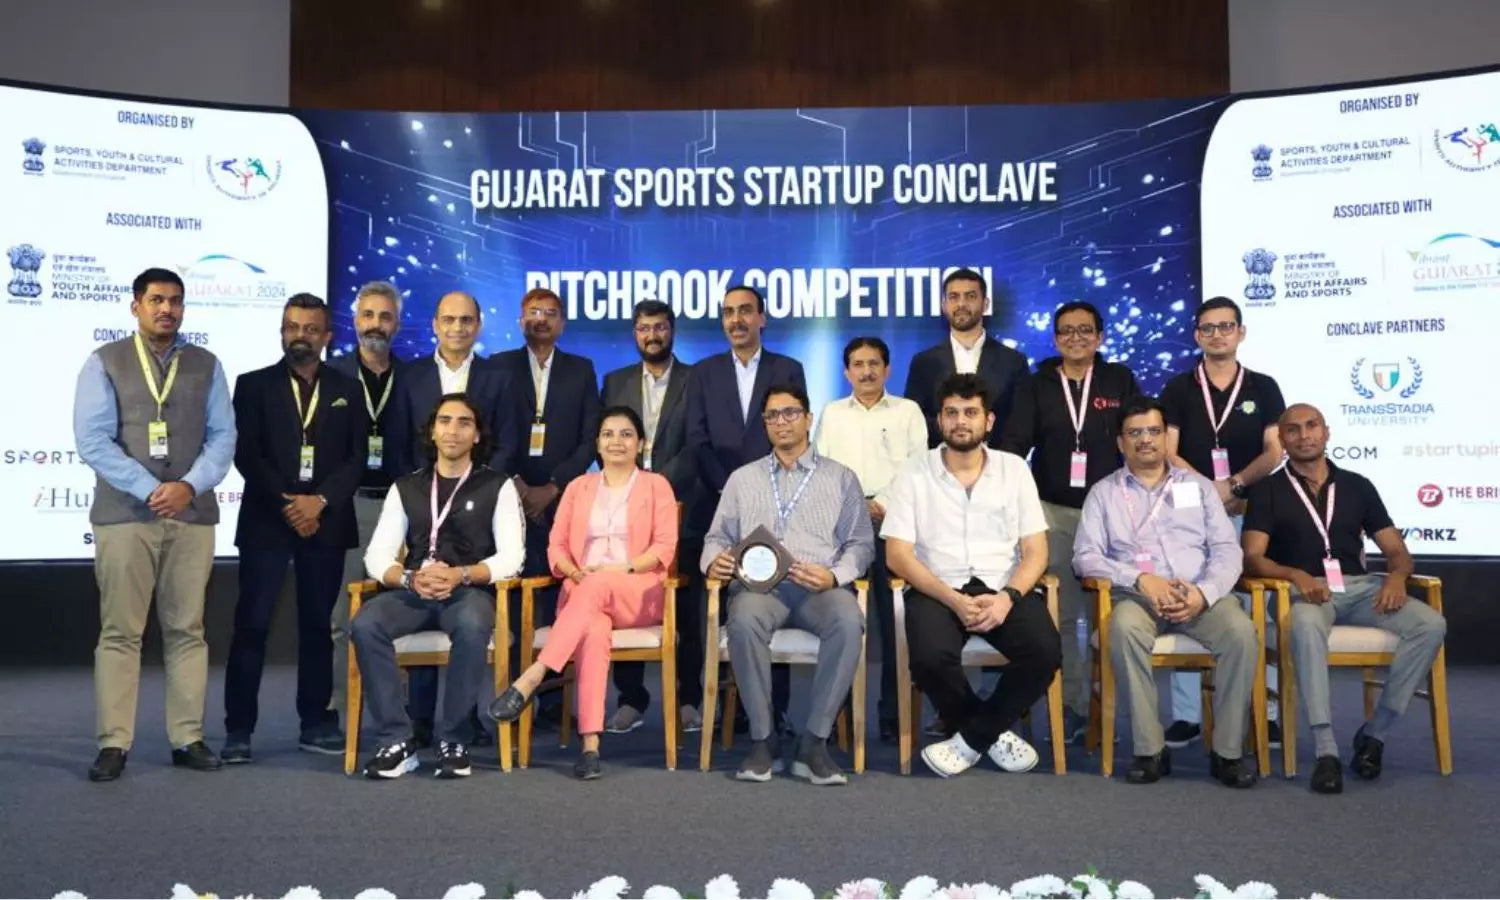 Baller Athletik claims Joint-3rd place in the Pitch Book Competition at the Inaugural Gujarat Sports Startup Conclave in Ahmedabad